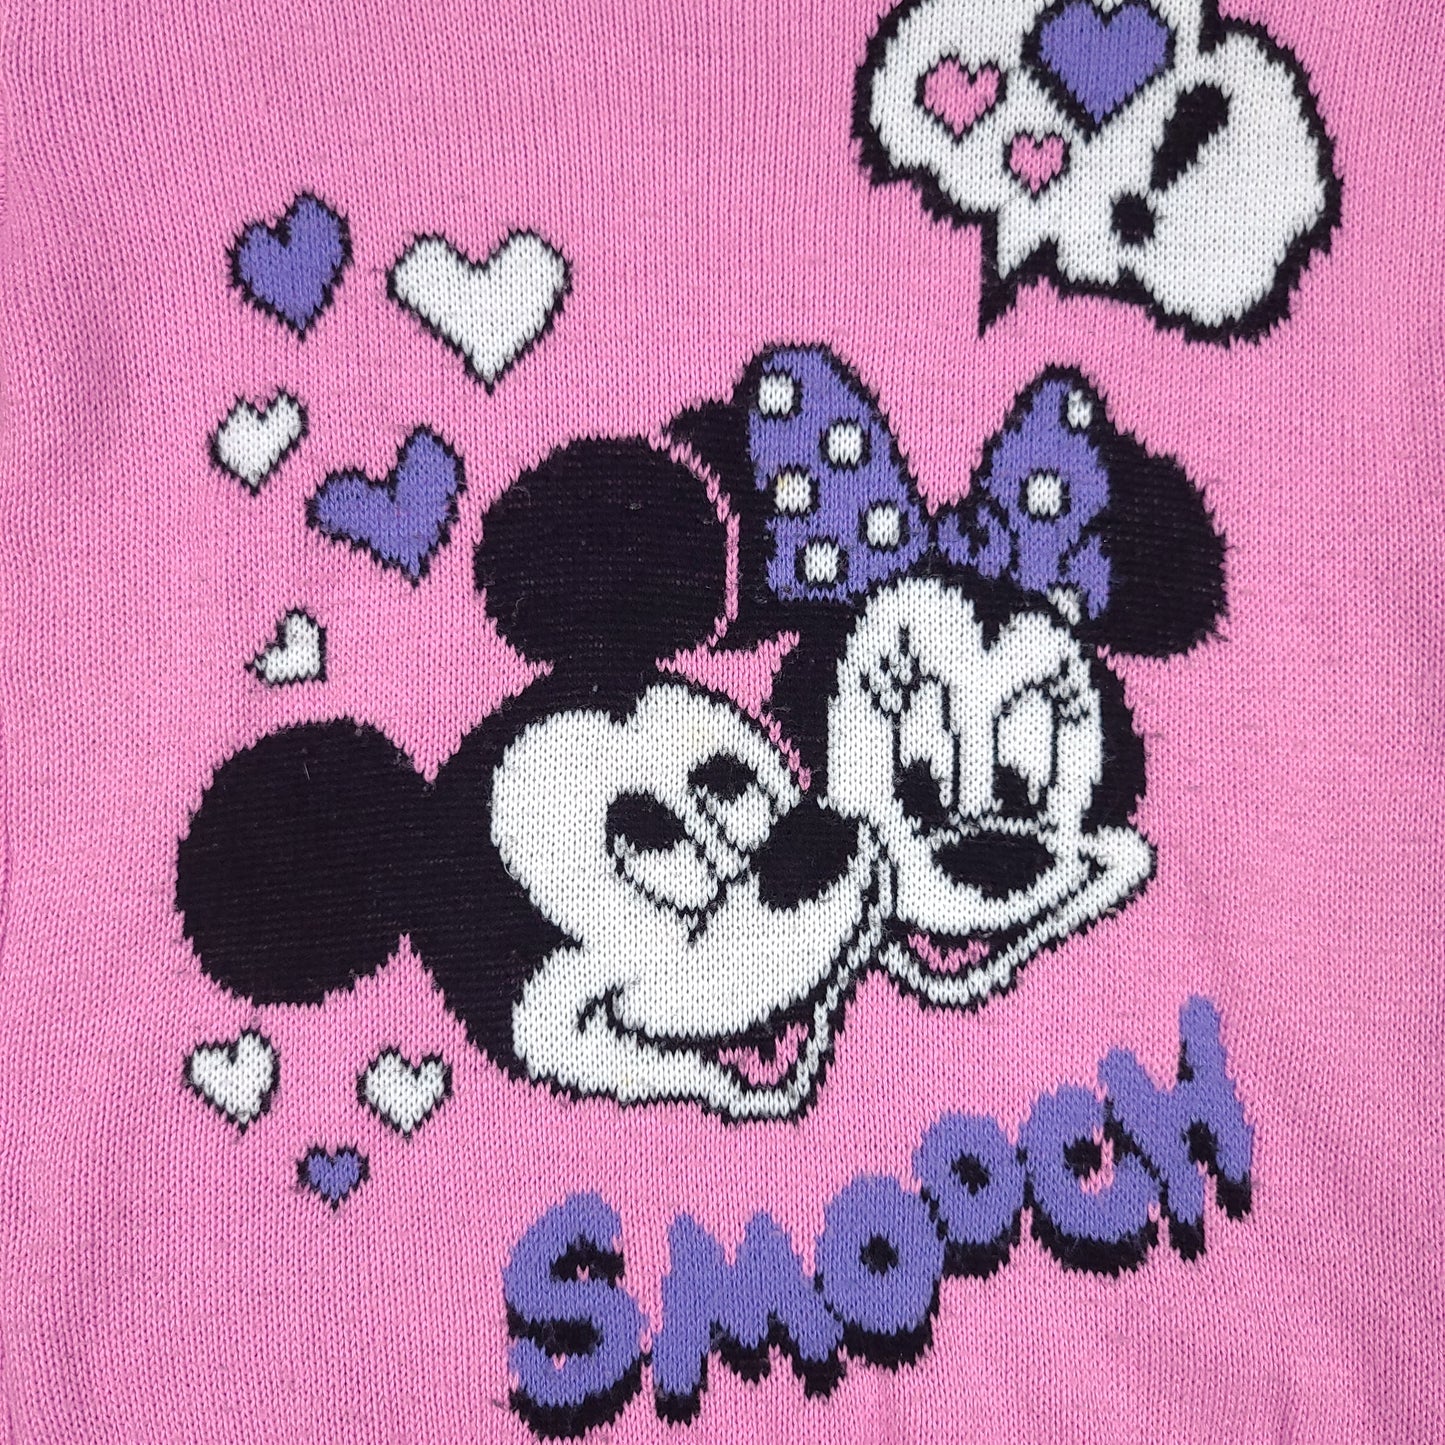 Vintage Mickey & Minnie Mouse Smooch Pink Knit Sweater